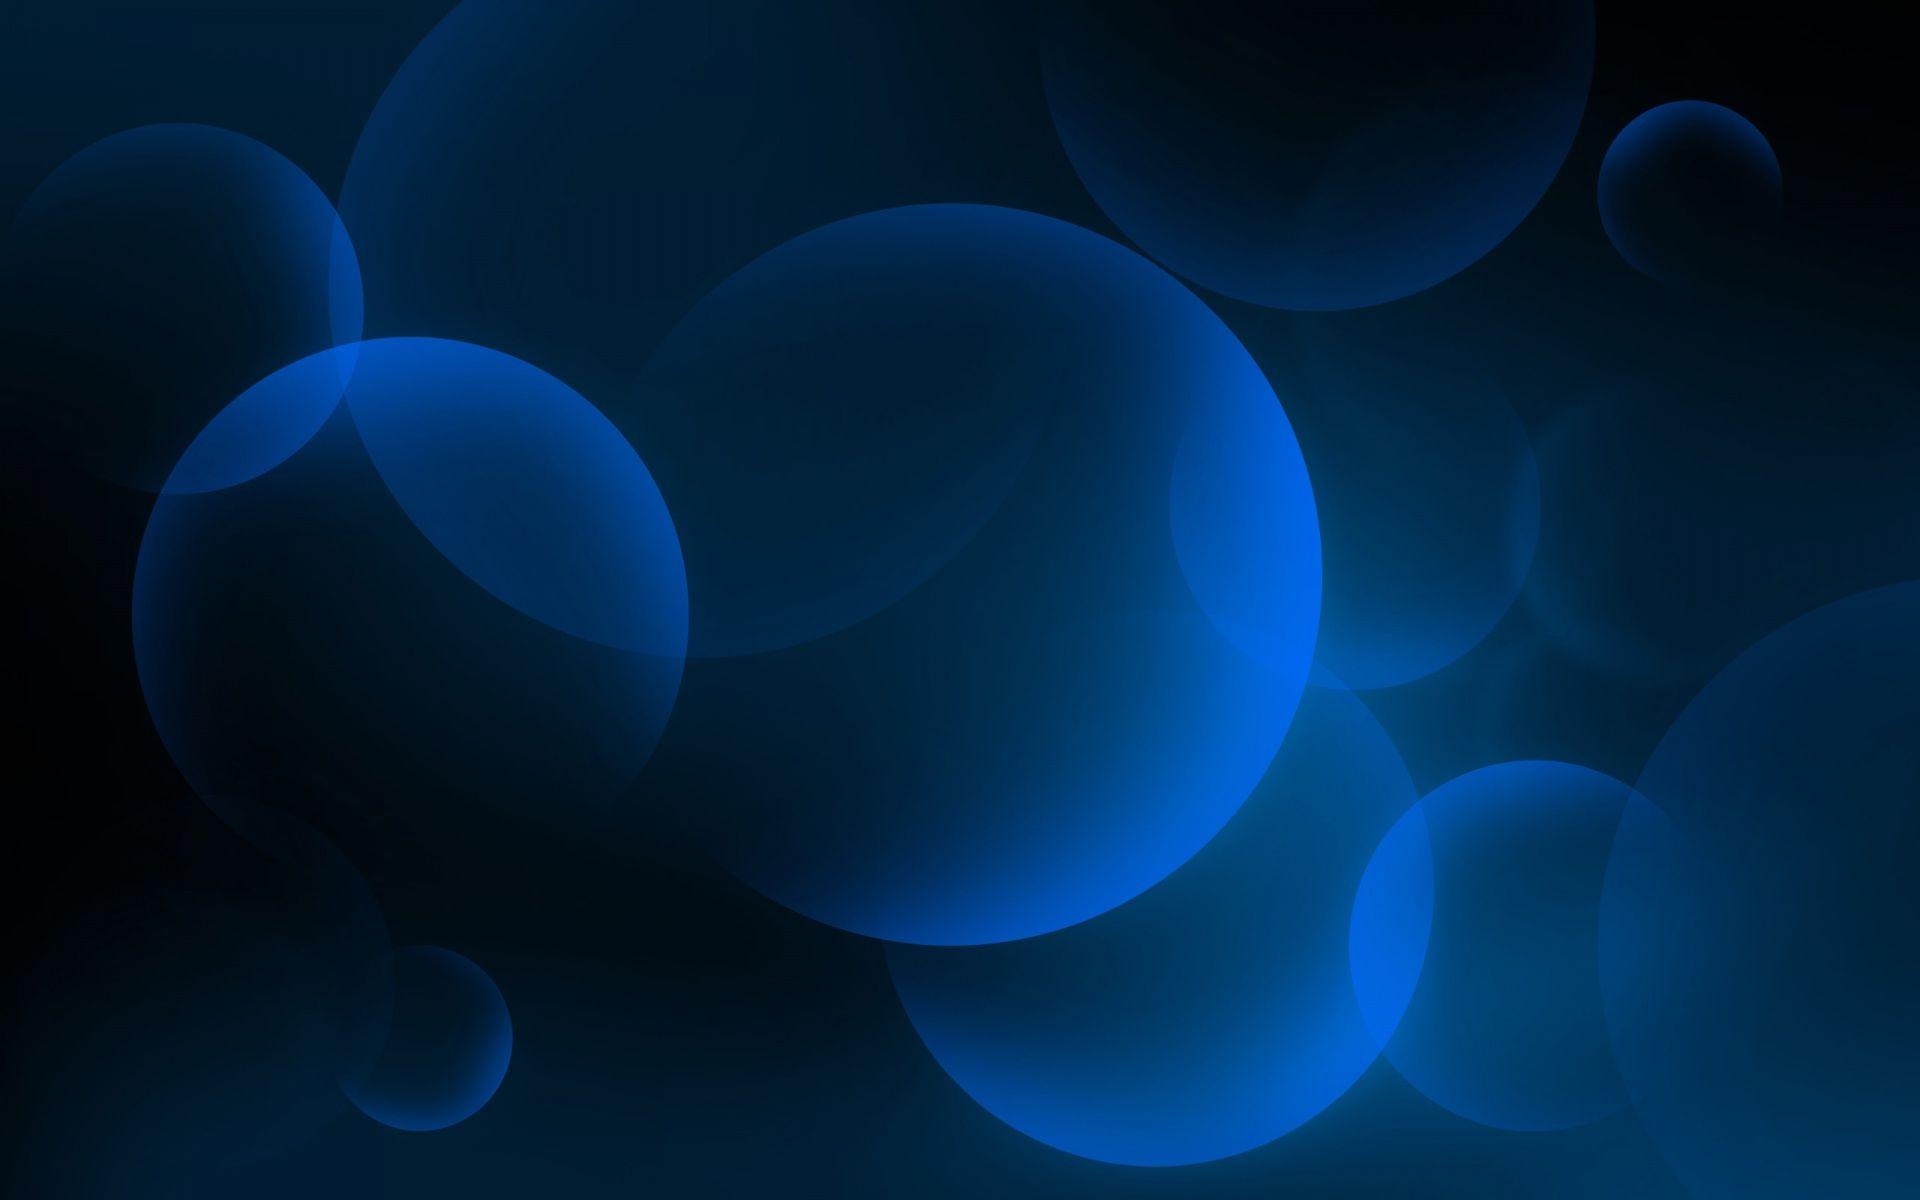 Blue bubbles abstract background 1920x1200 wallpaper. Tech